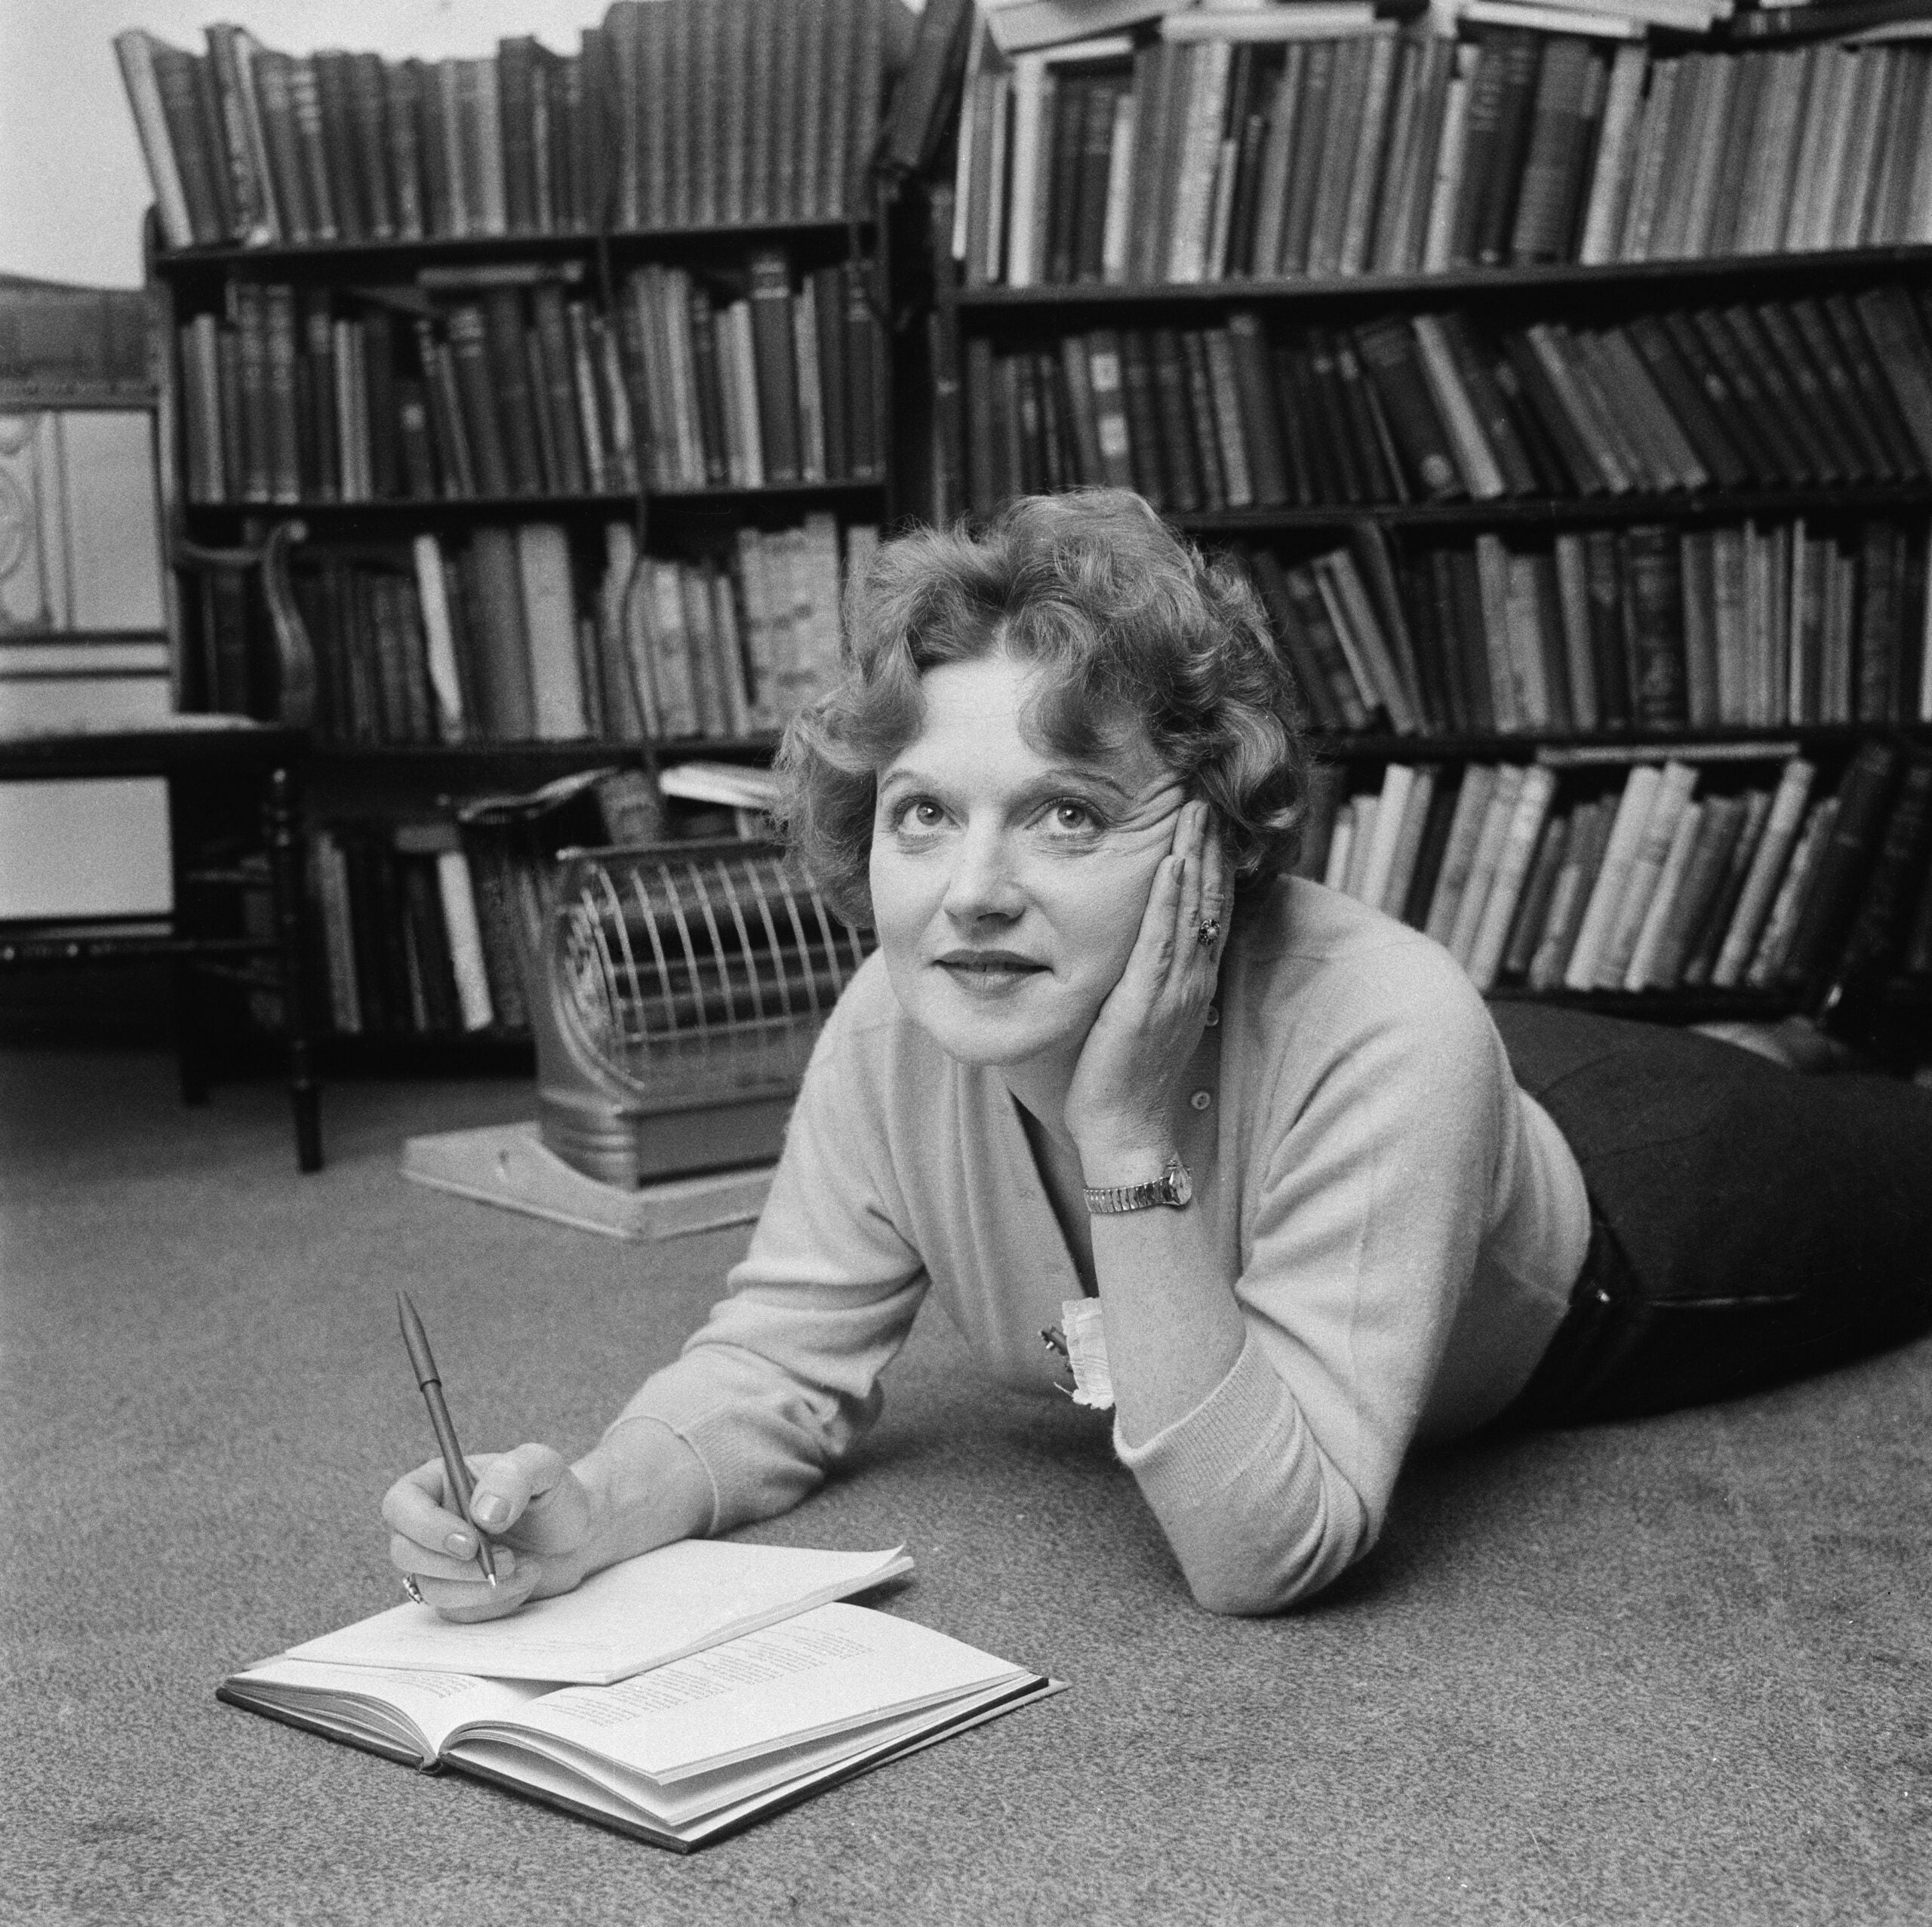 From the NS archive: The Prime of Miss Muriel Spark